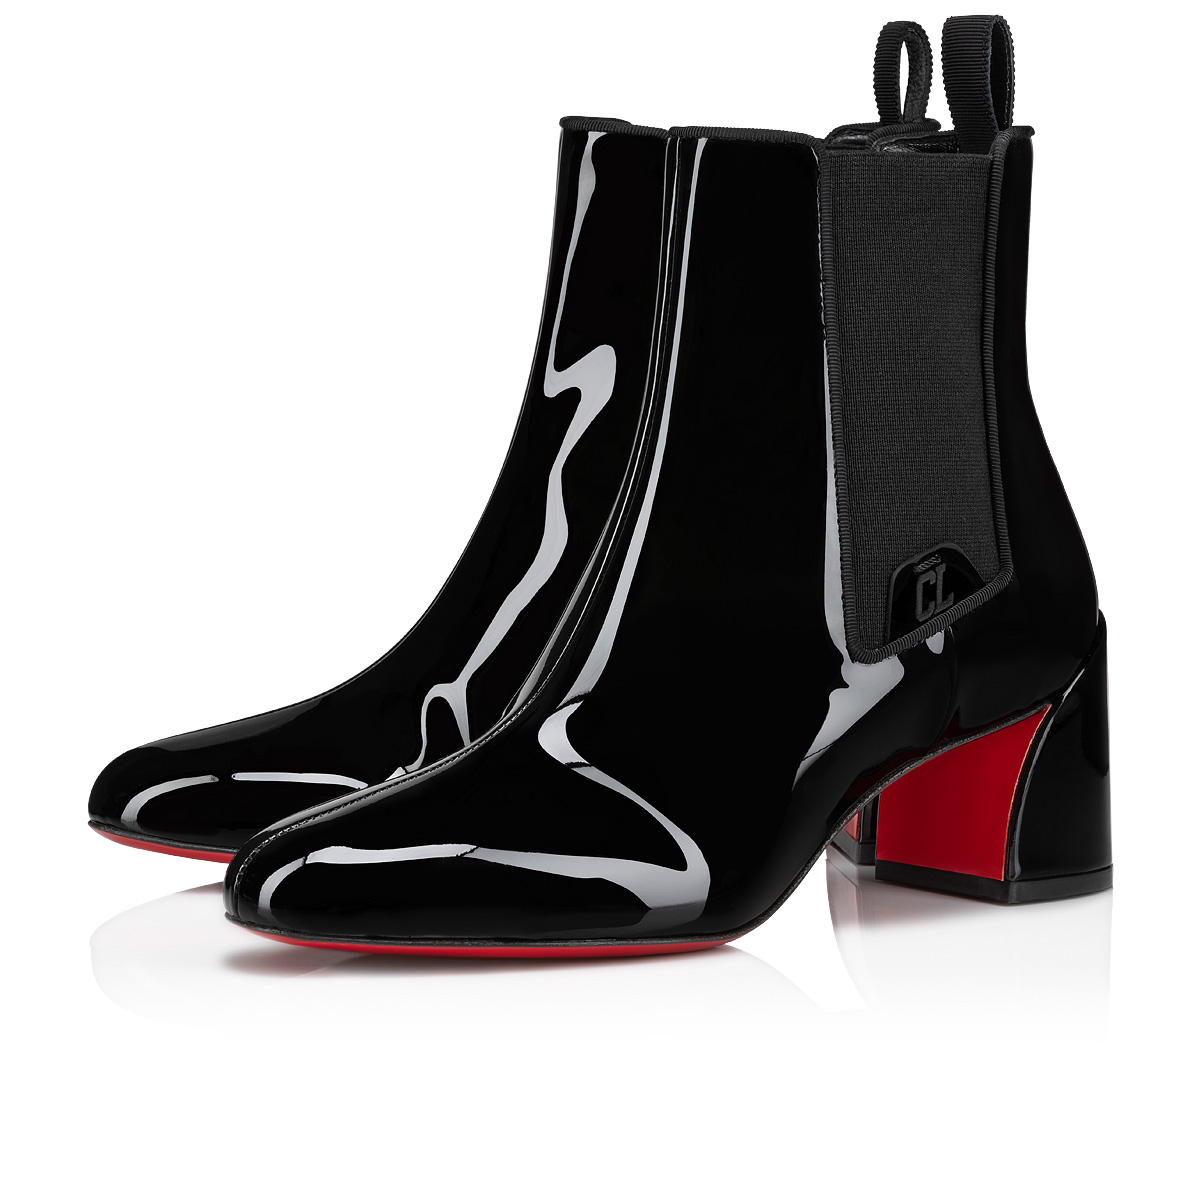 CHRISTIAN LOUBOUTIN Turelastic 55 croc-effect patent-leather Chelsea boots